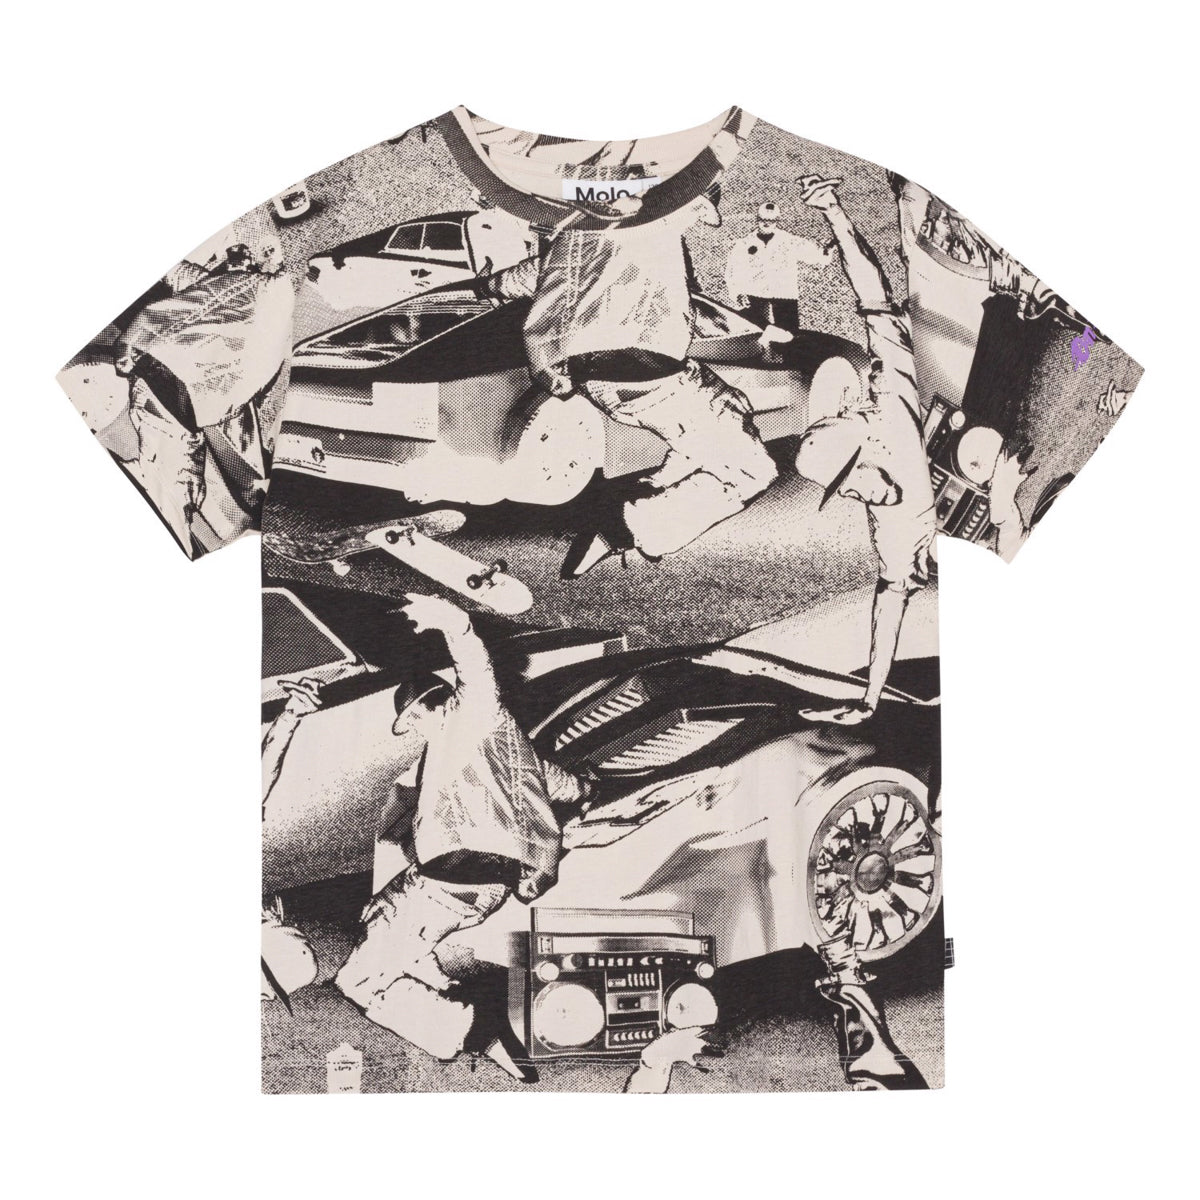 Rodney from Molo is a t-shirt in a black, all over print in 100% organic cotton. The print is a 2-toned abstract print